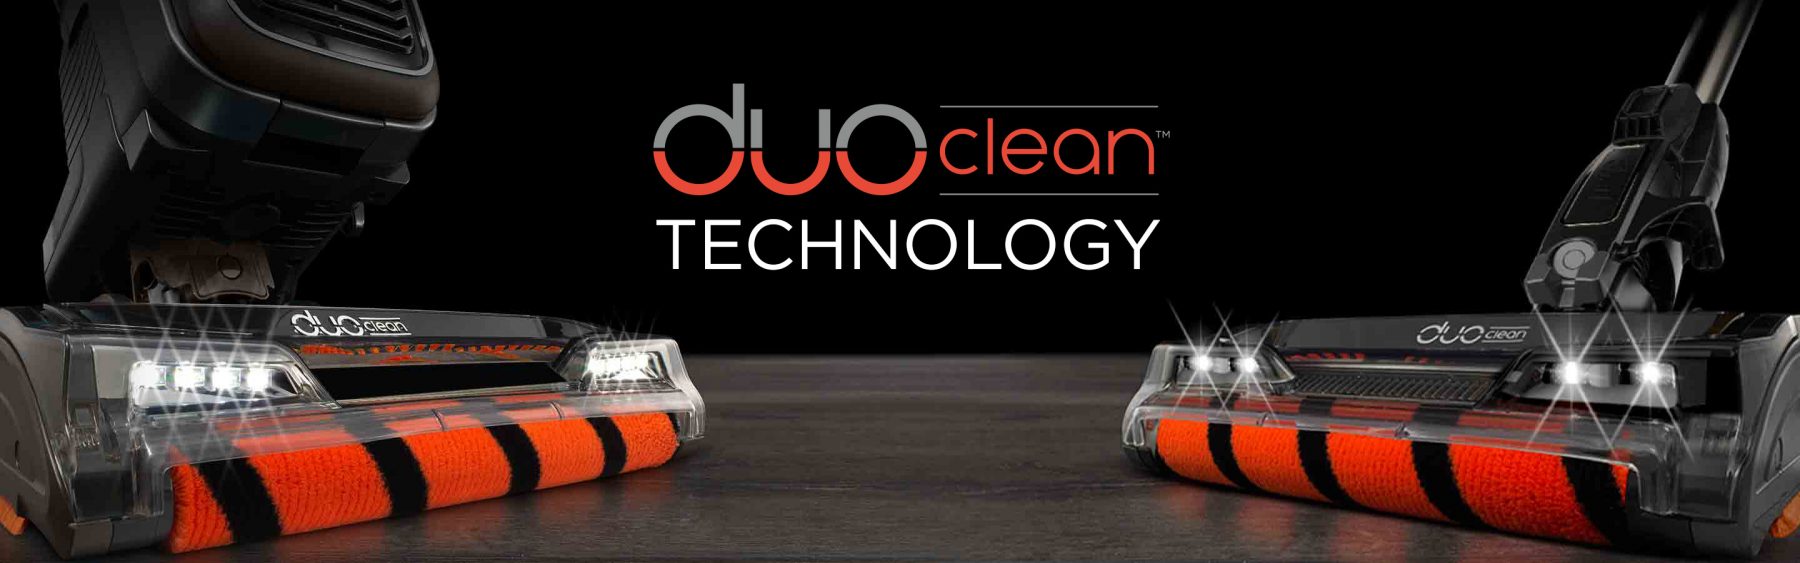 Duoclean Technology